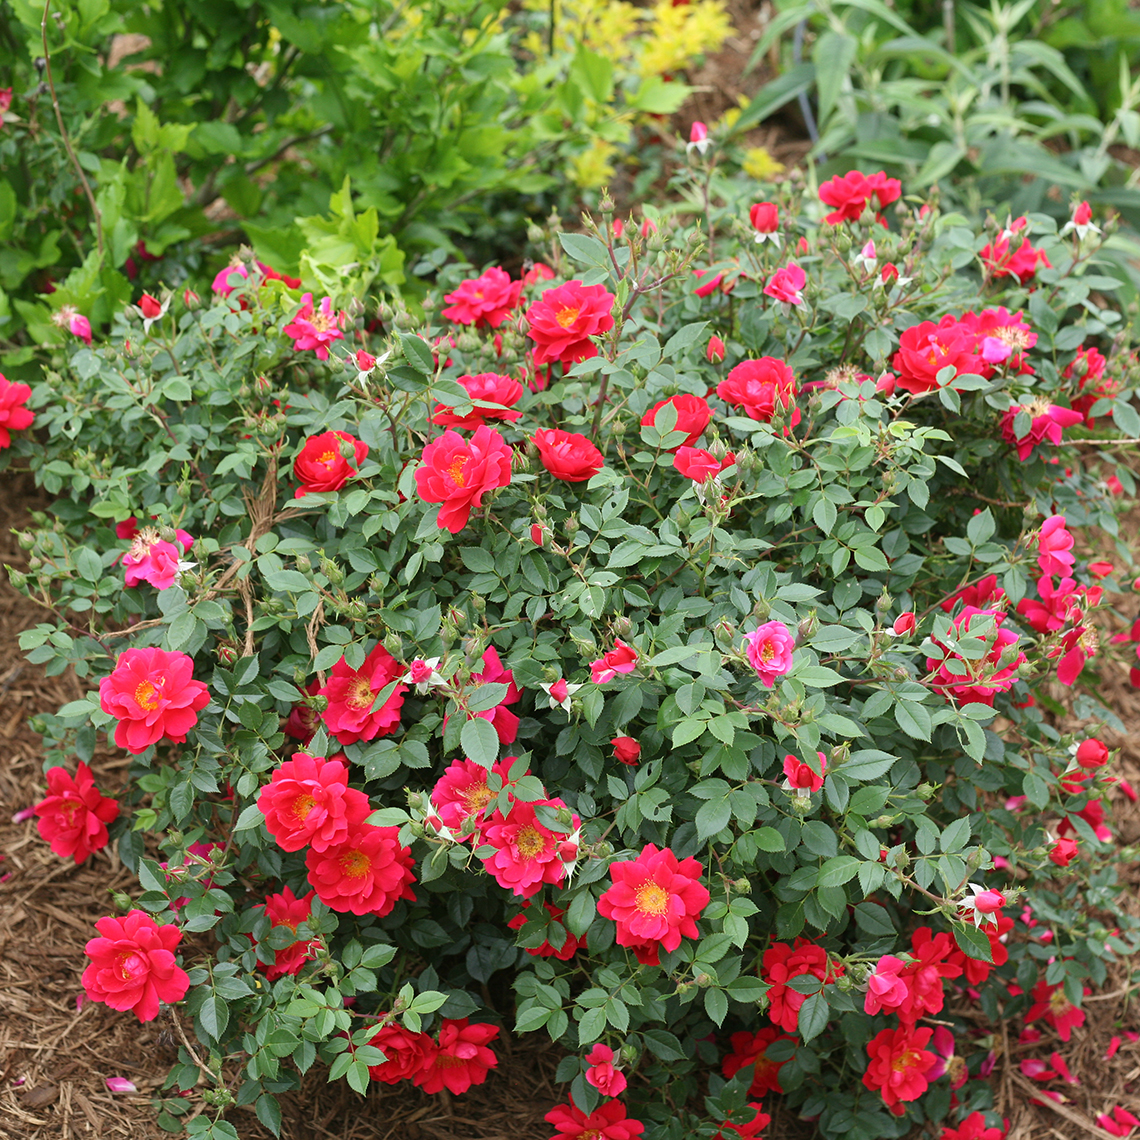 Mounded Oso Easy Urban Legend Rosa with dozens of scarlet flowers and buds